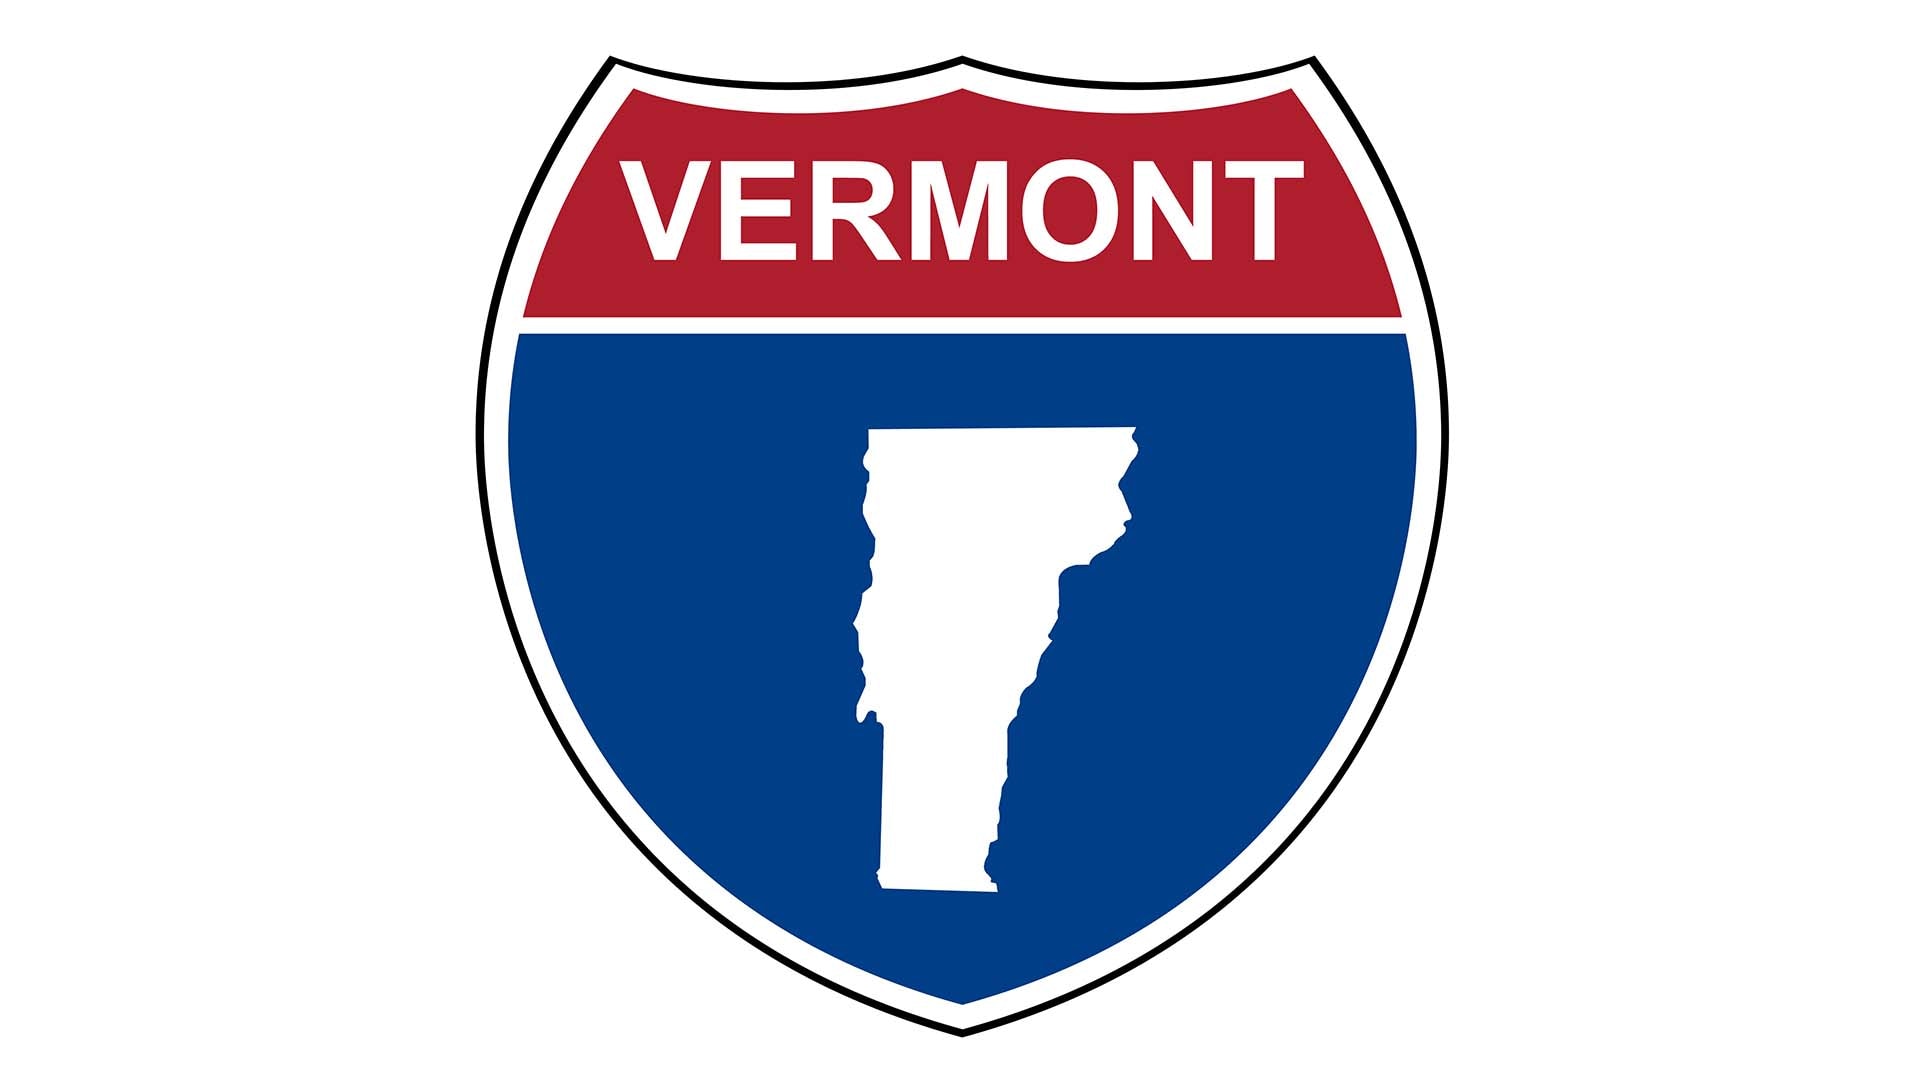 Vermont state roadside sign